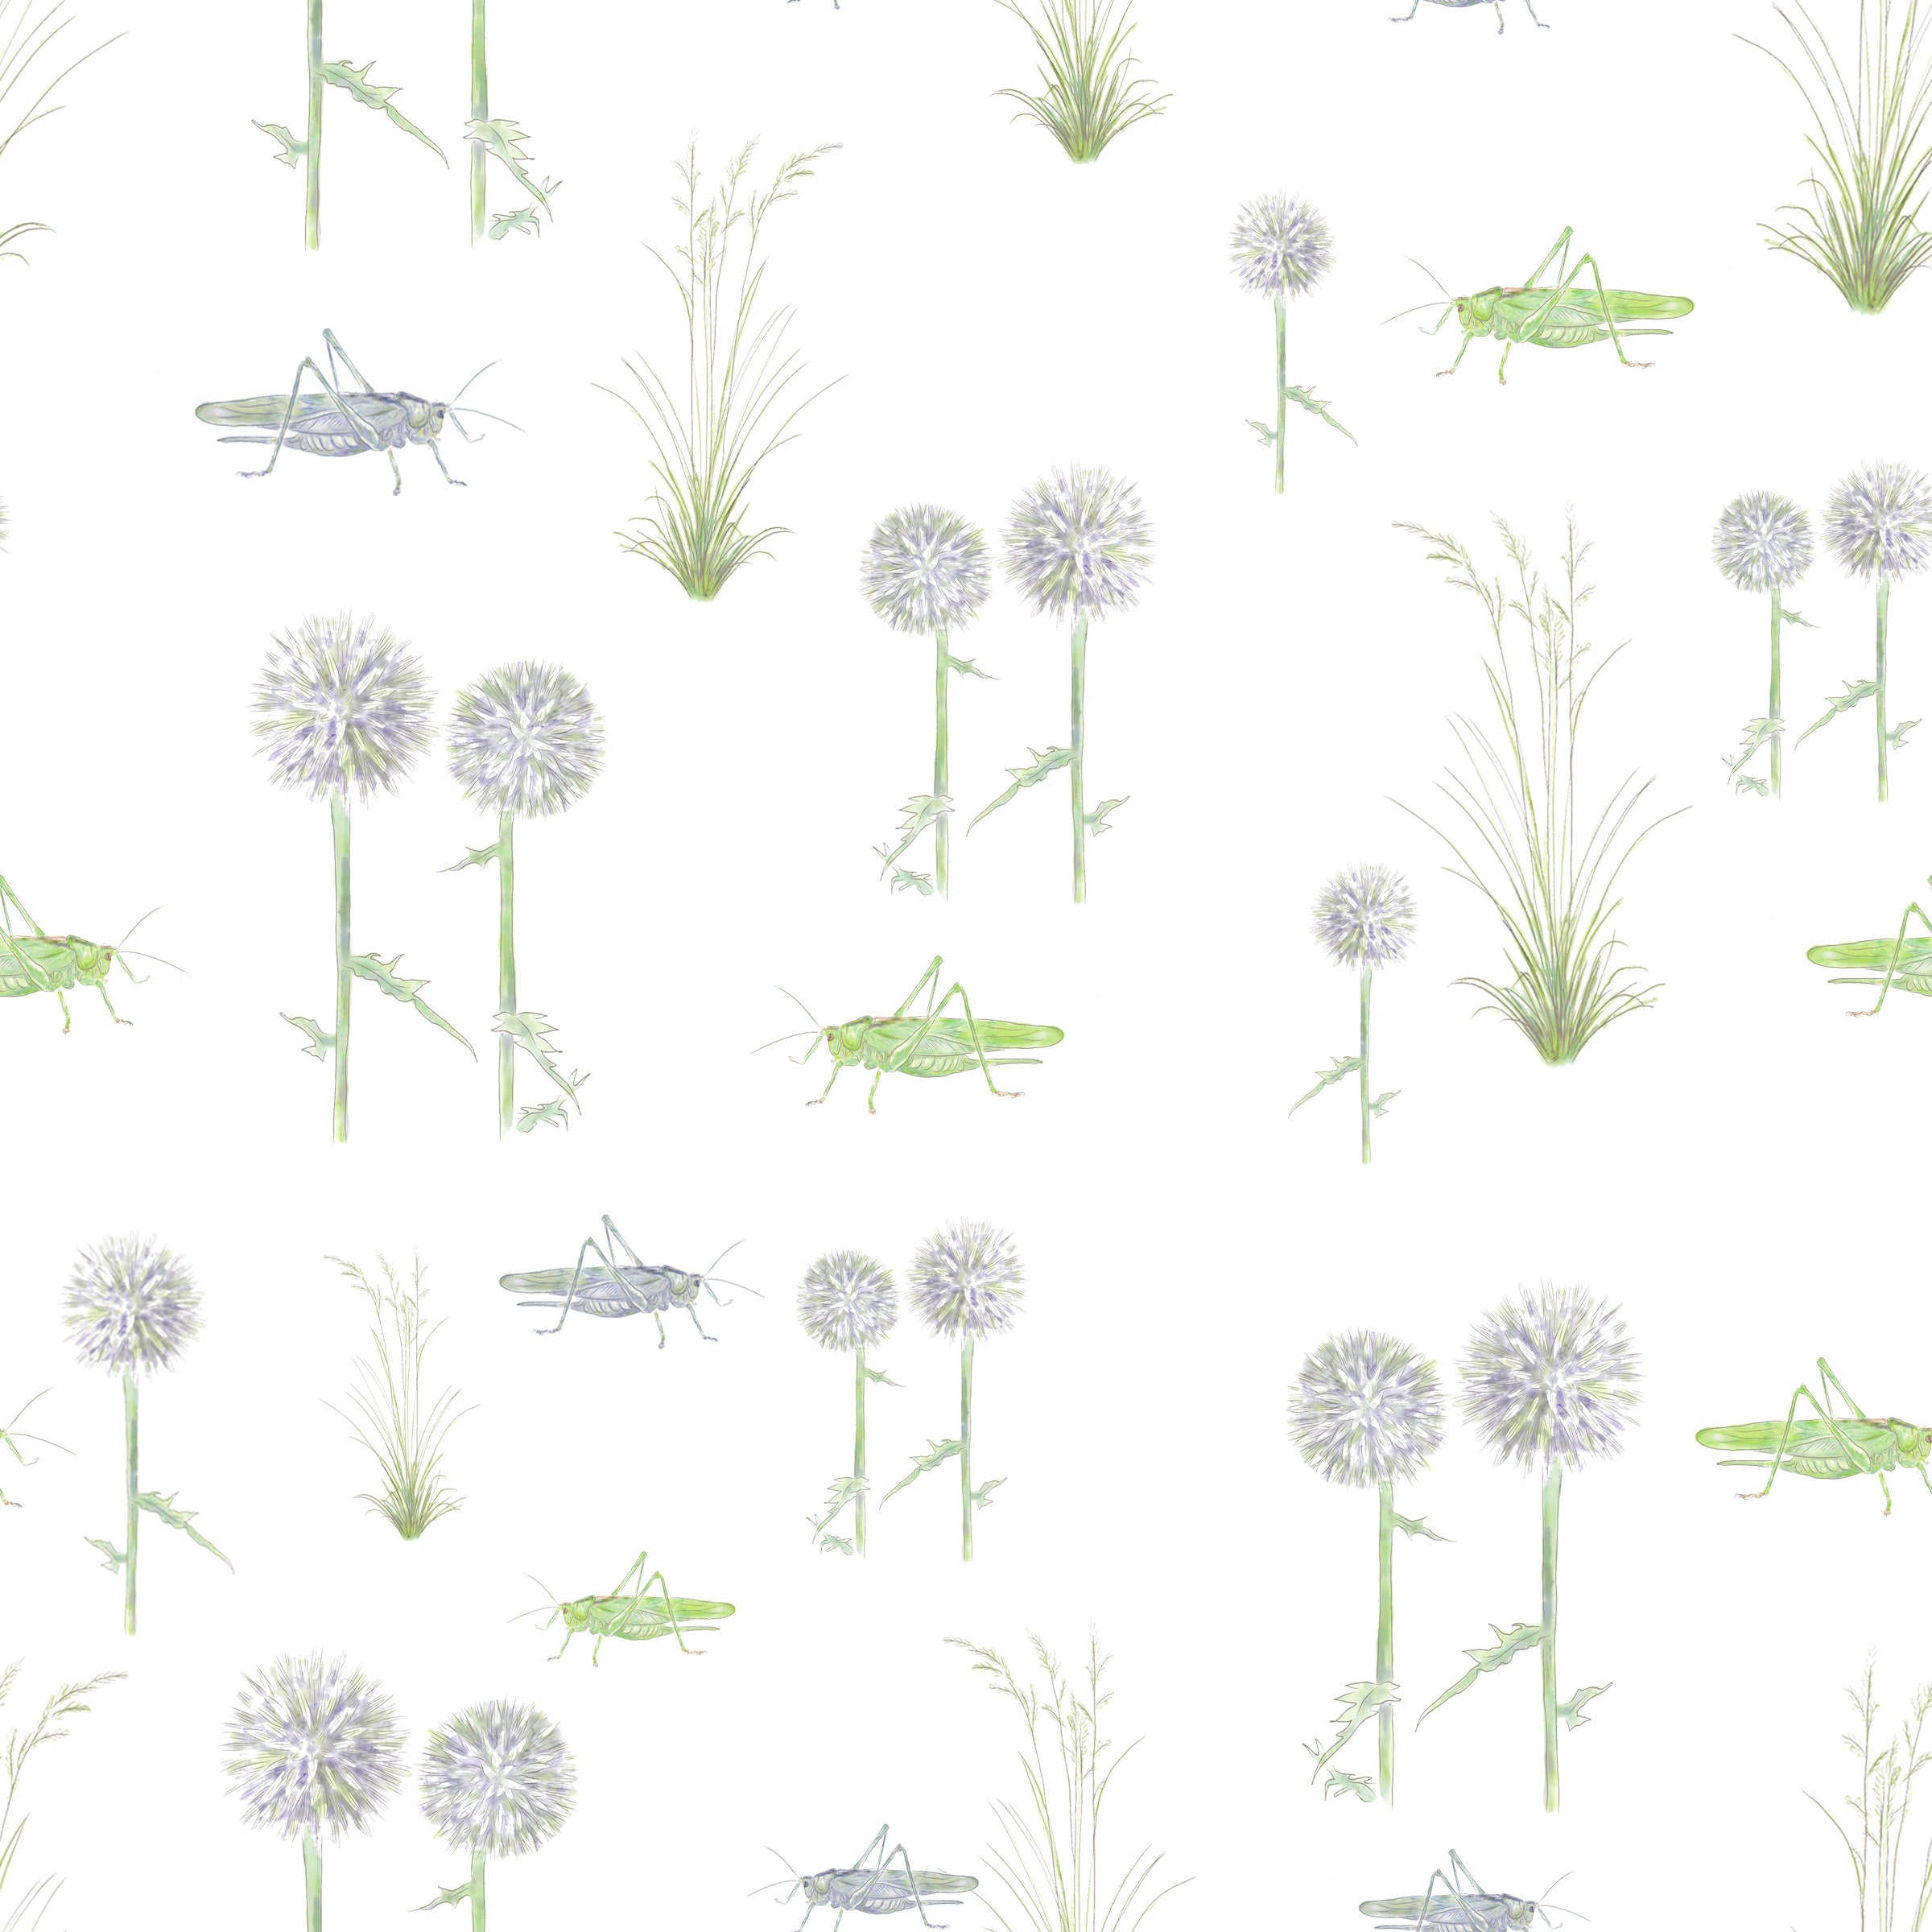 GRASSHOPPERS, GLOBE THISTLE AND GRASS PATTERN